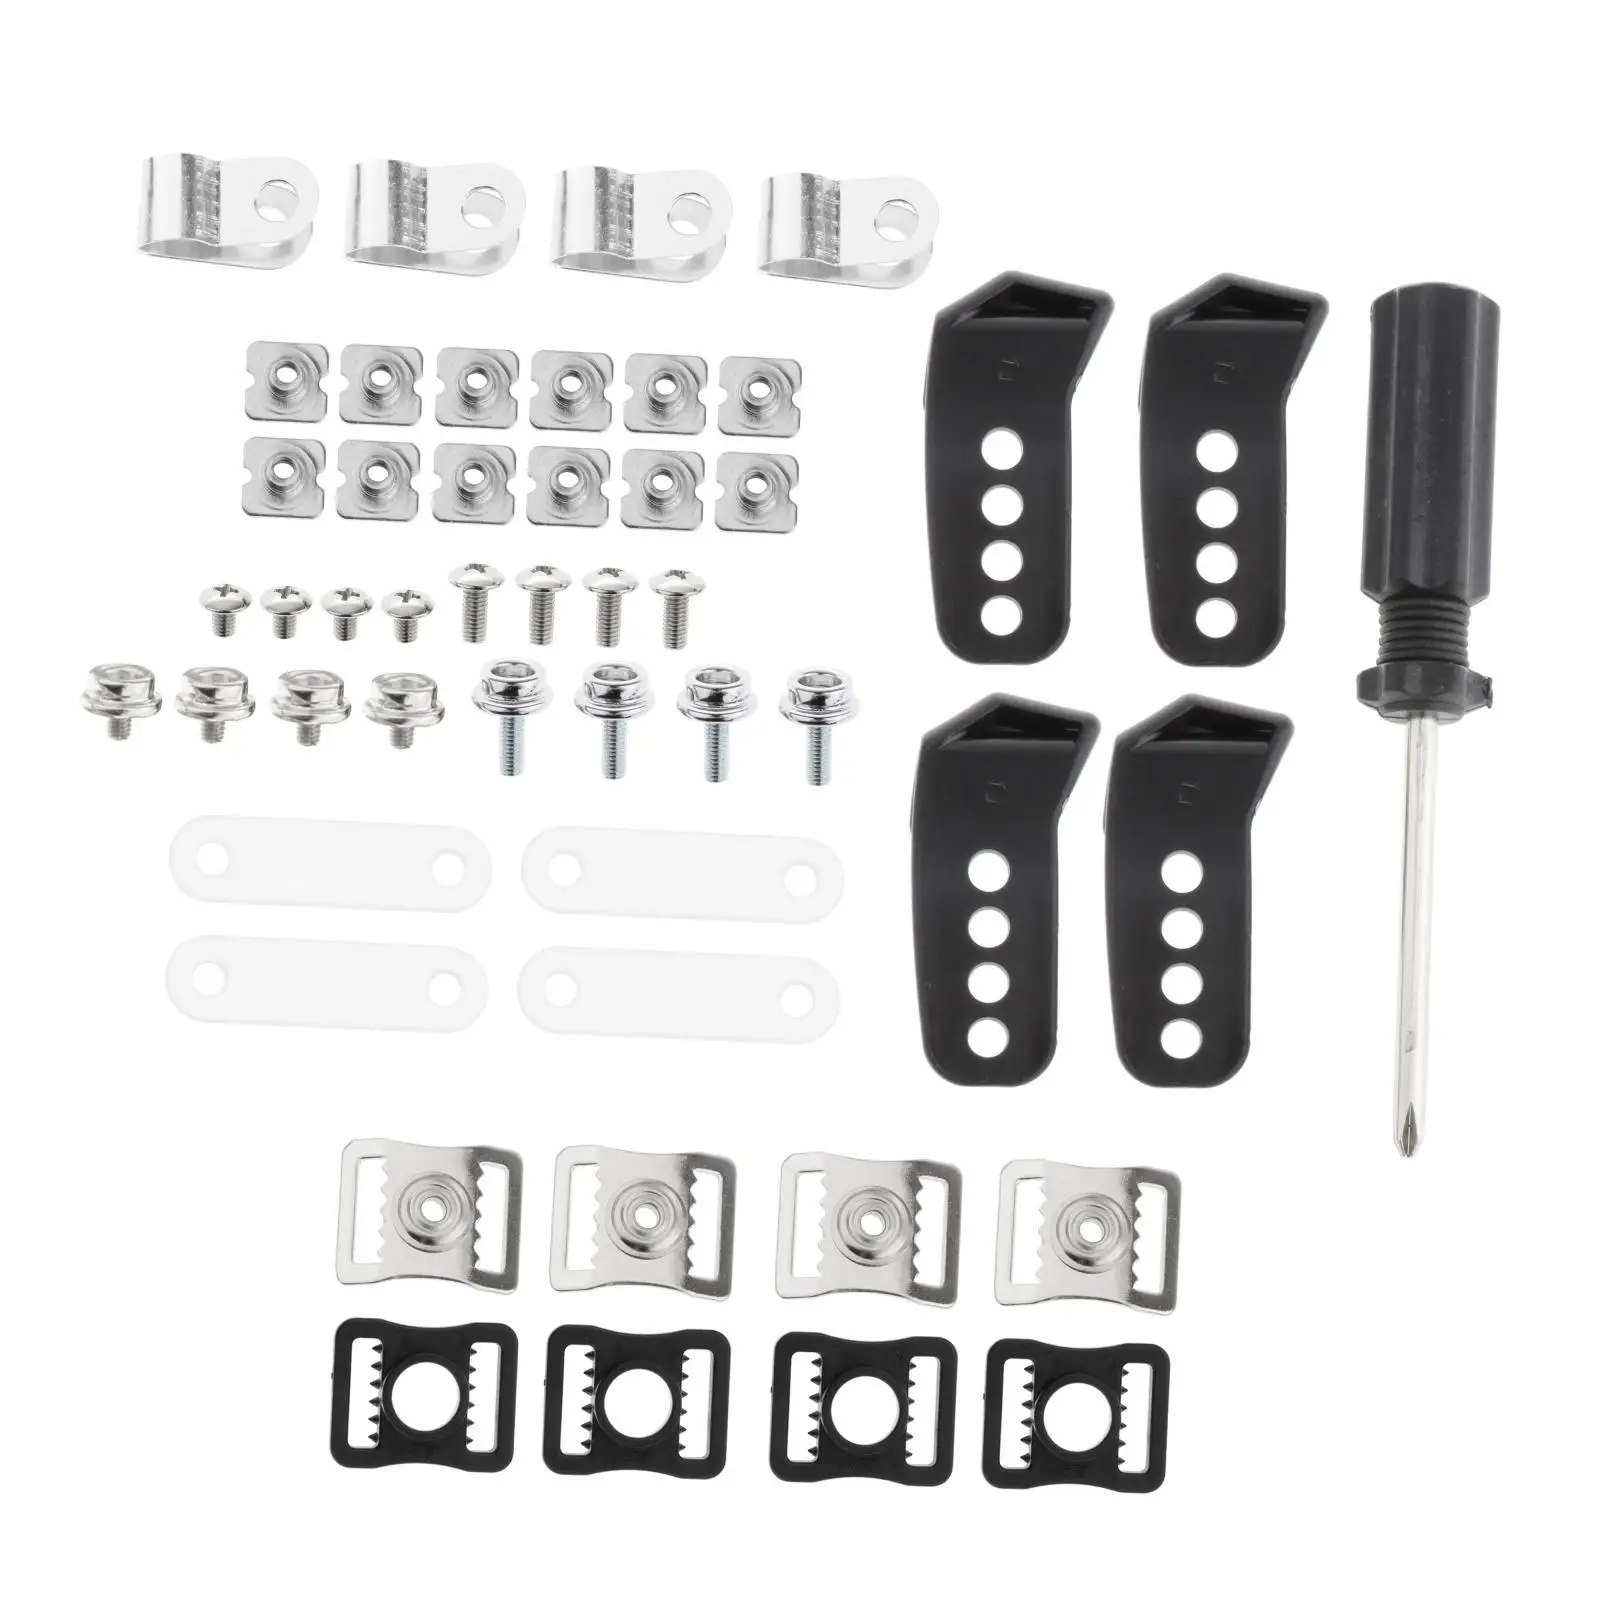 35Pcs Football Helmet Repair Kit Nuts R Clips Rubber Gaskets Repair Stainless Steel for Sports Baseball Youth Back up Hardwares